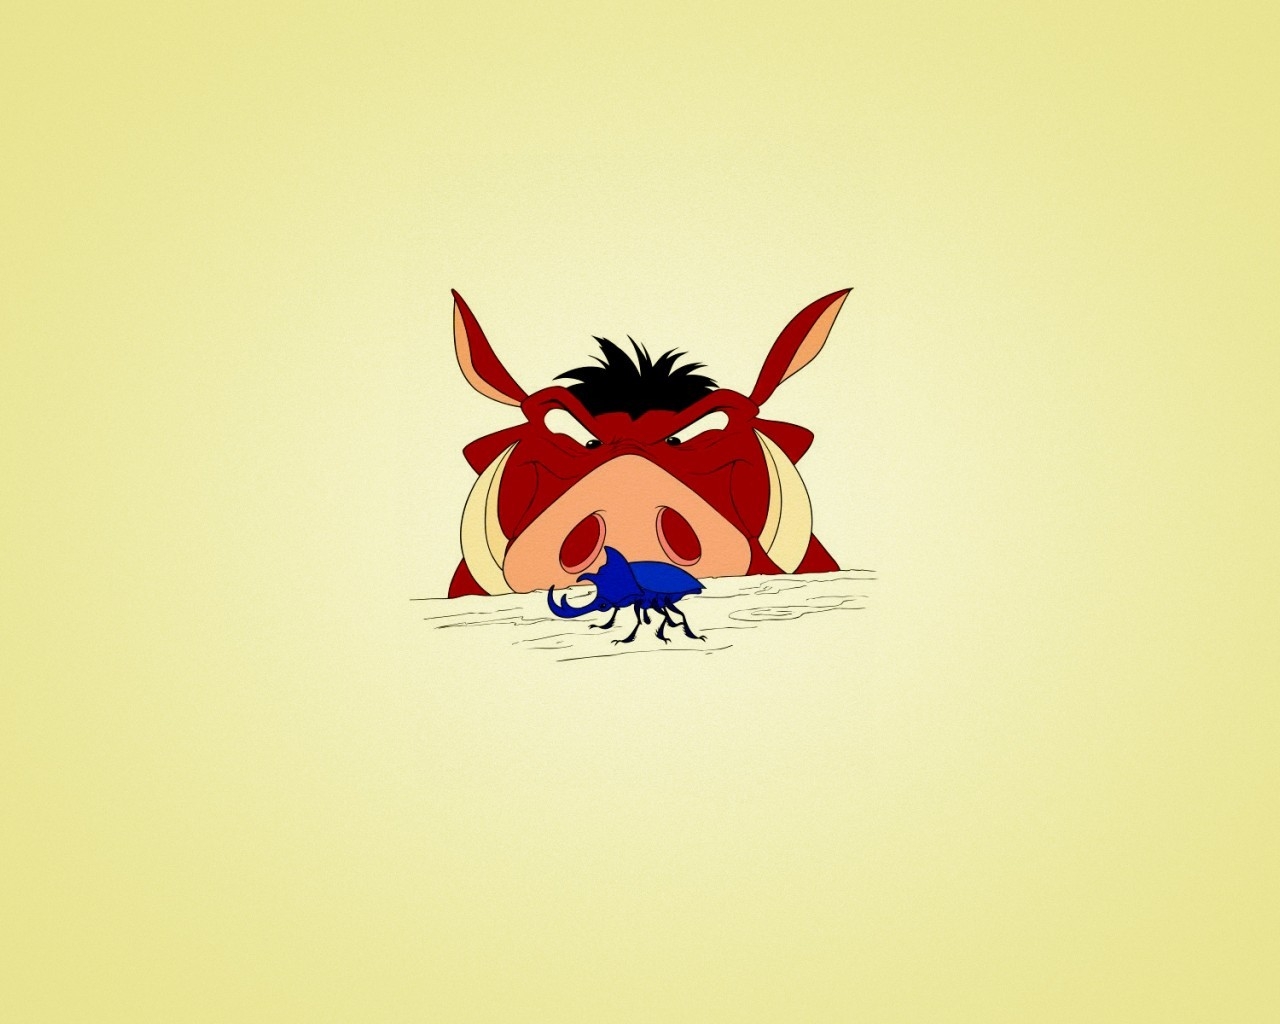 Timon and Pumbaa for 1280 x 1024 resolution